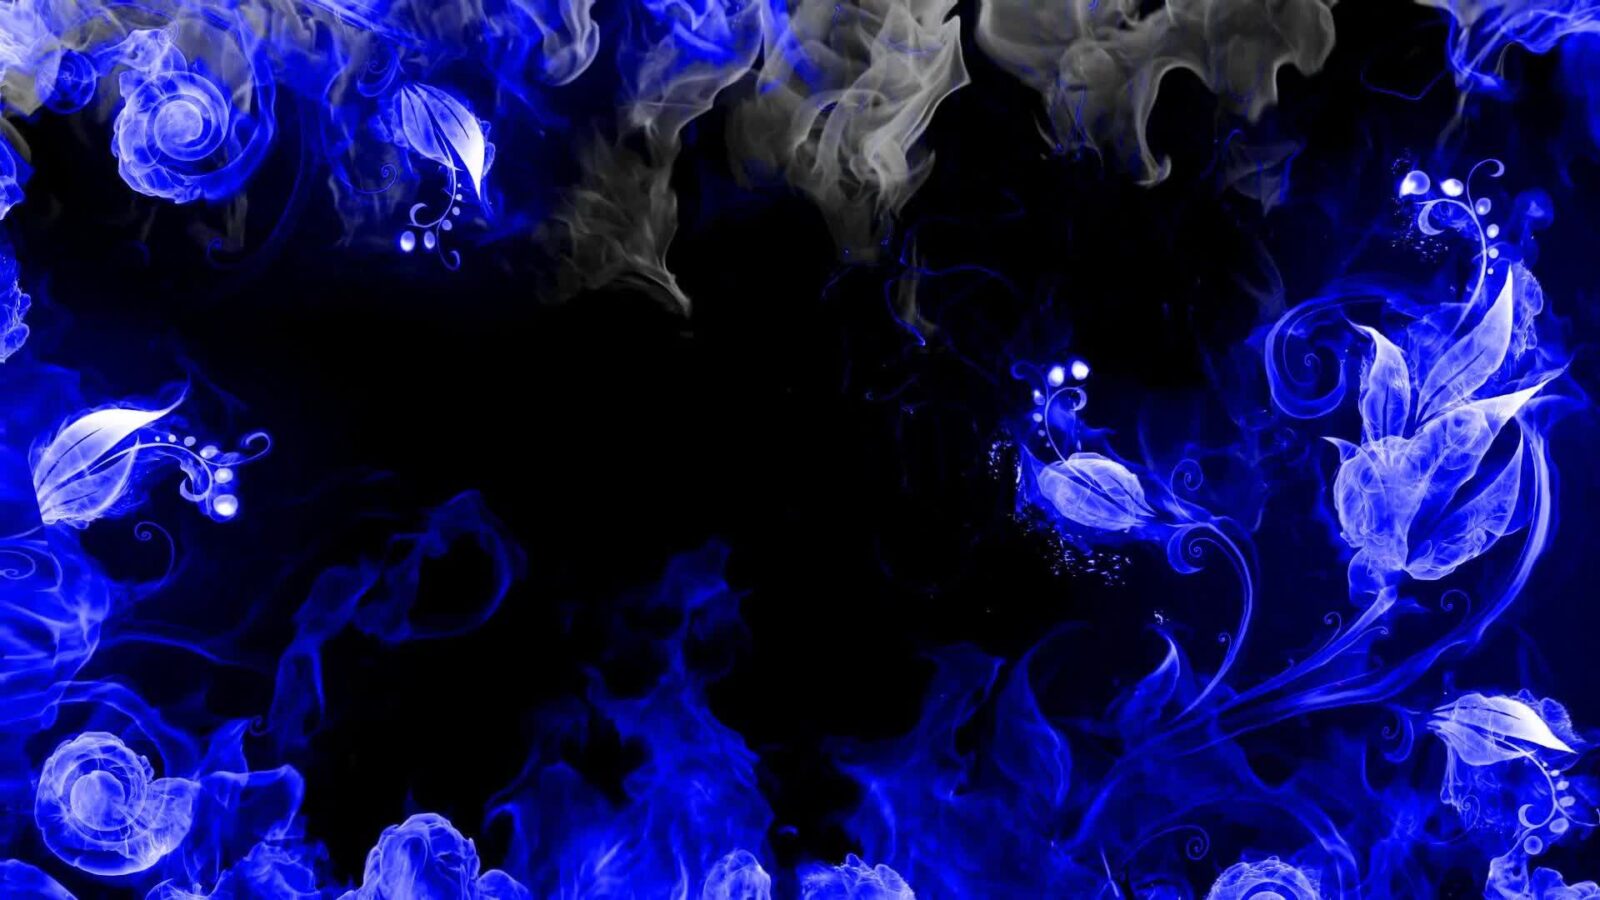 LiveWallpapers4Free.com | Blue Flowers and Dark Smoke Abstract Artwork - Free Live Wallpaper